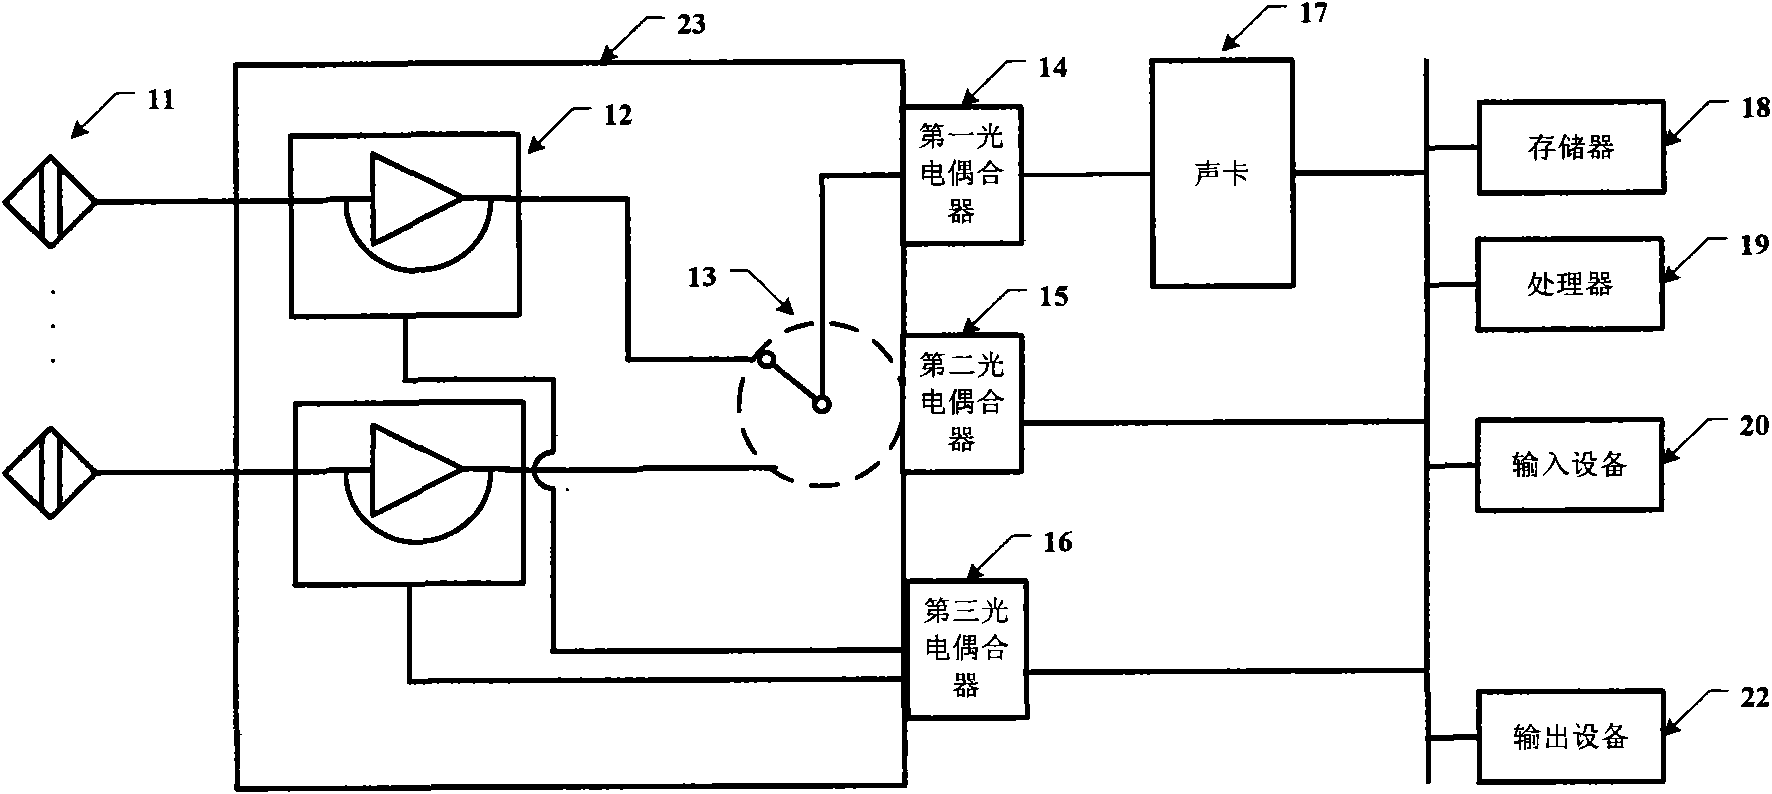 Computer built-in signal amplifier and audio card multichannel bio-signal sampling system